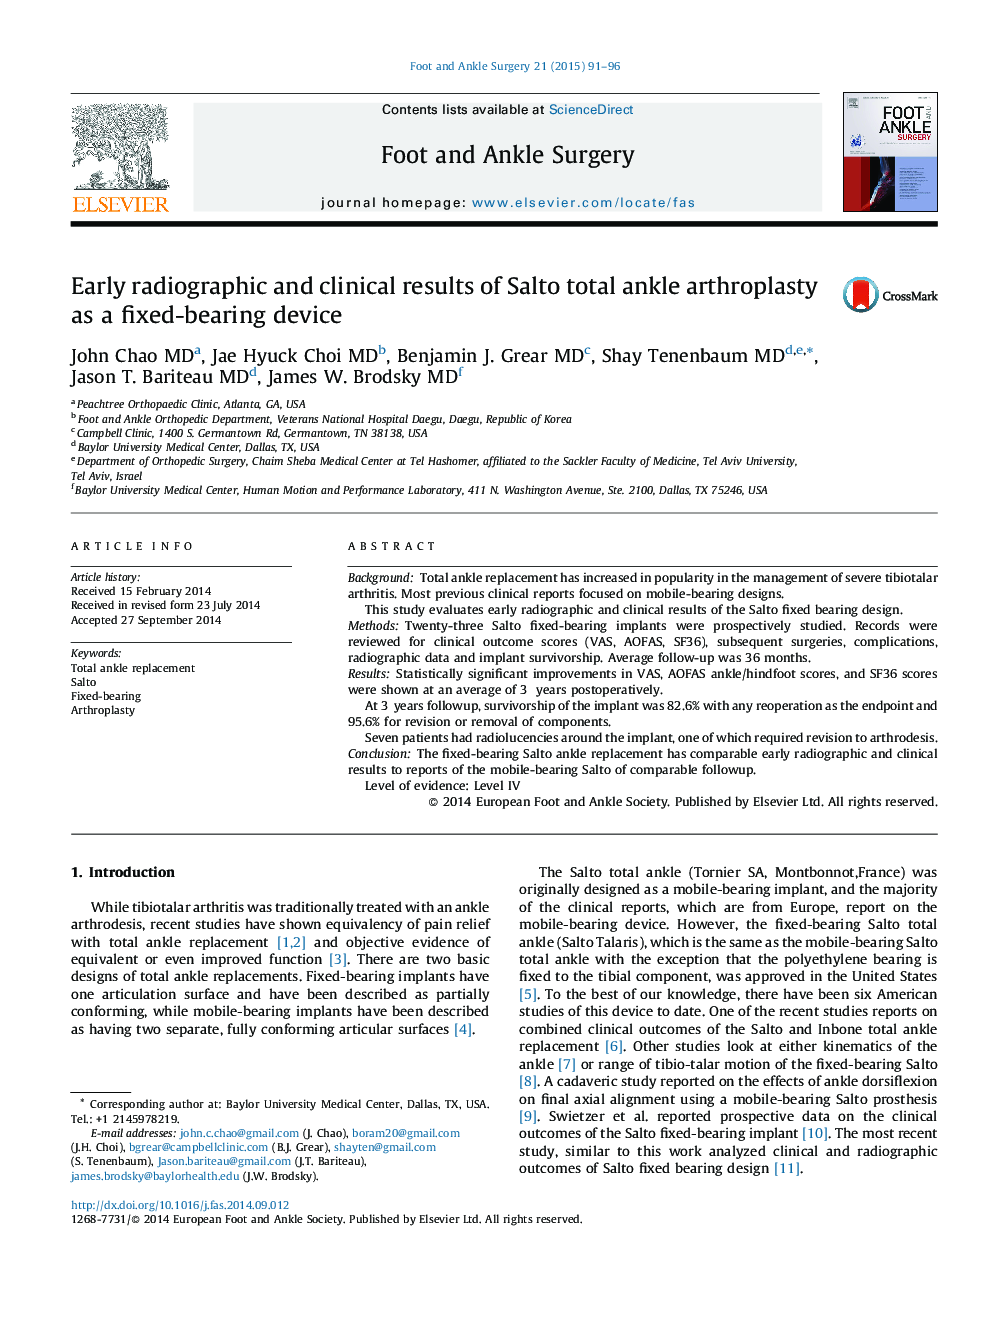 Early radiographic and clinical results of Salto total ankle arthroplasty as a fixed-bearing device